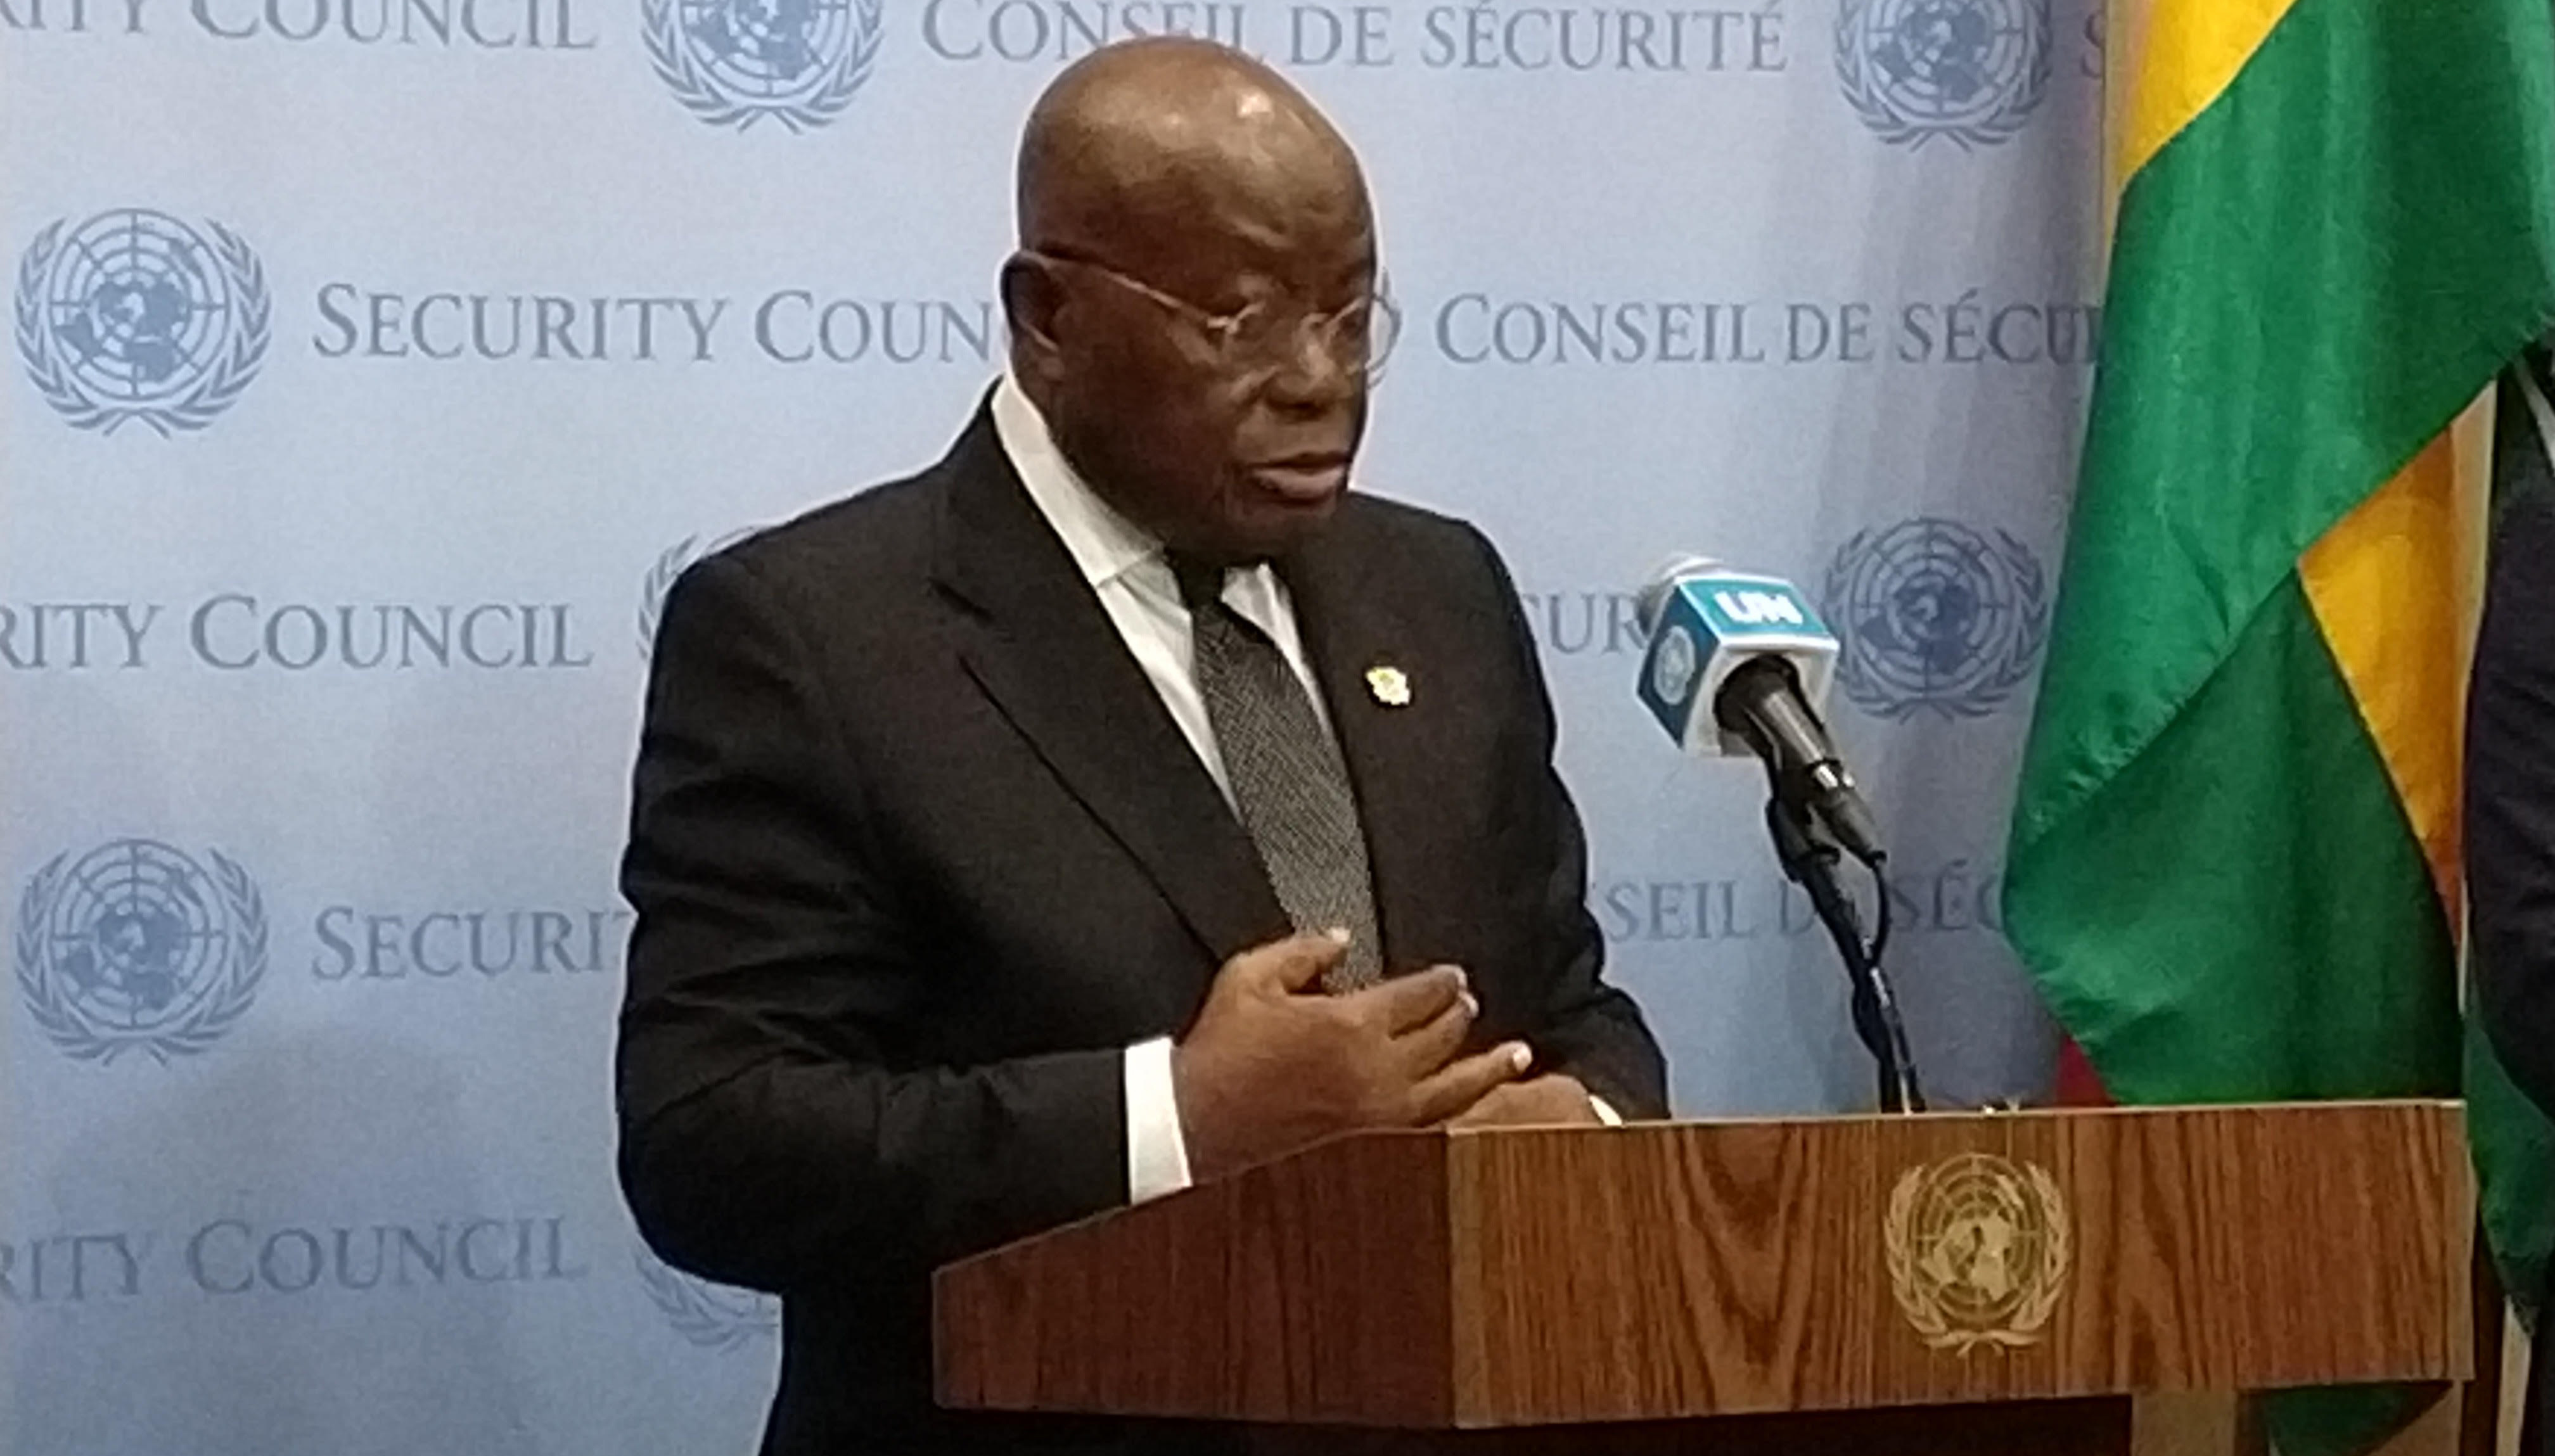 Ghana’s President speaks to reporters outside the United Nations Security Council on Thursday, November 11, 2022. (Photo: Arul Louis)